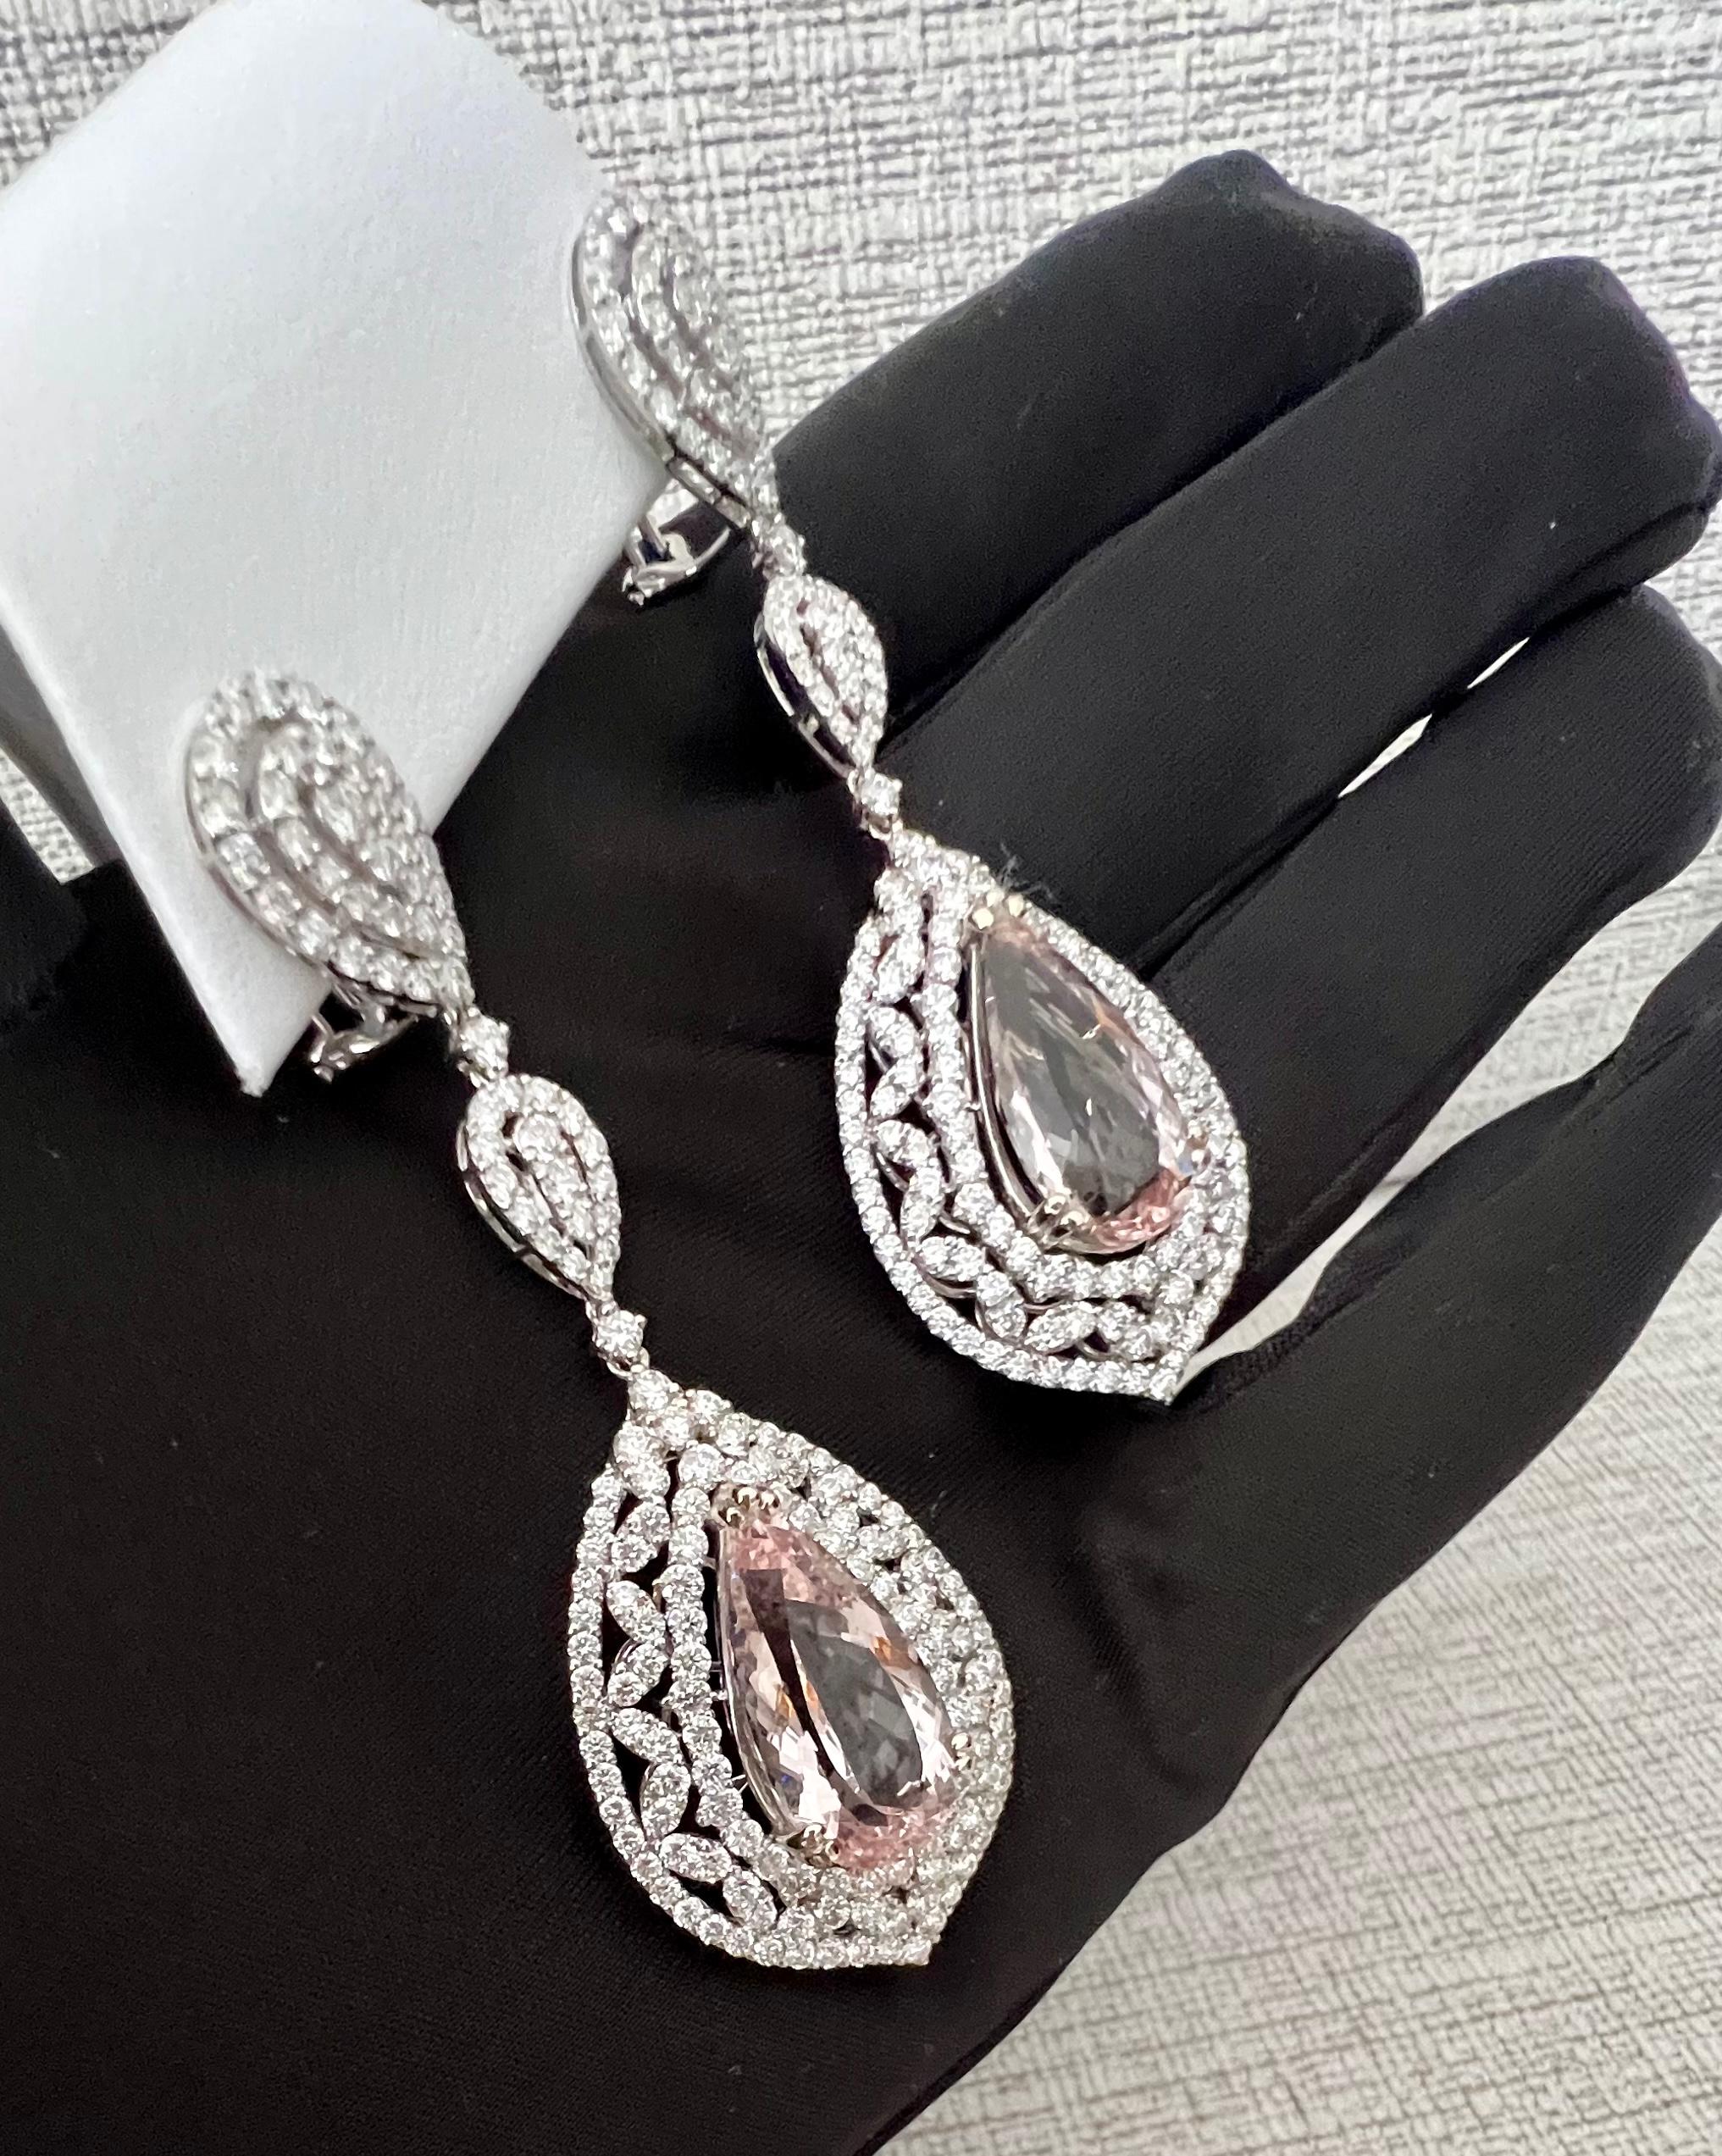 Artisan Exquisite 33.85 Carat Pink Morganite and Diamond Earrings in 18K White Gold For Sale